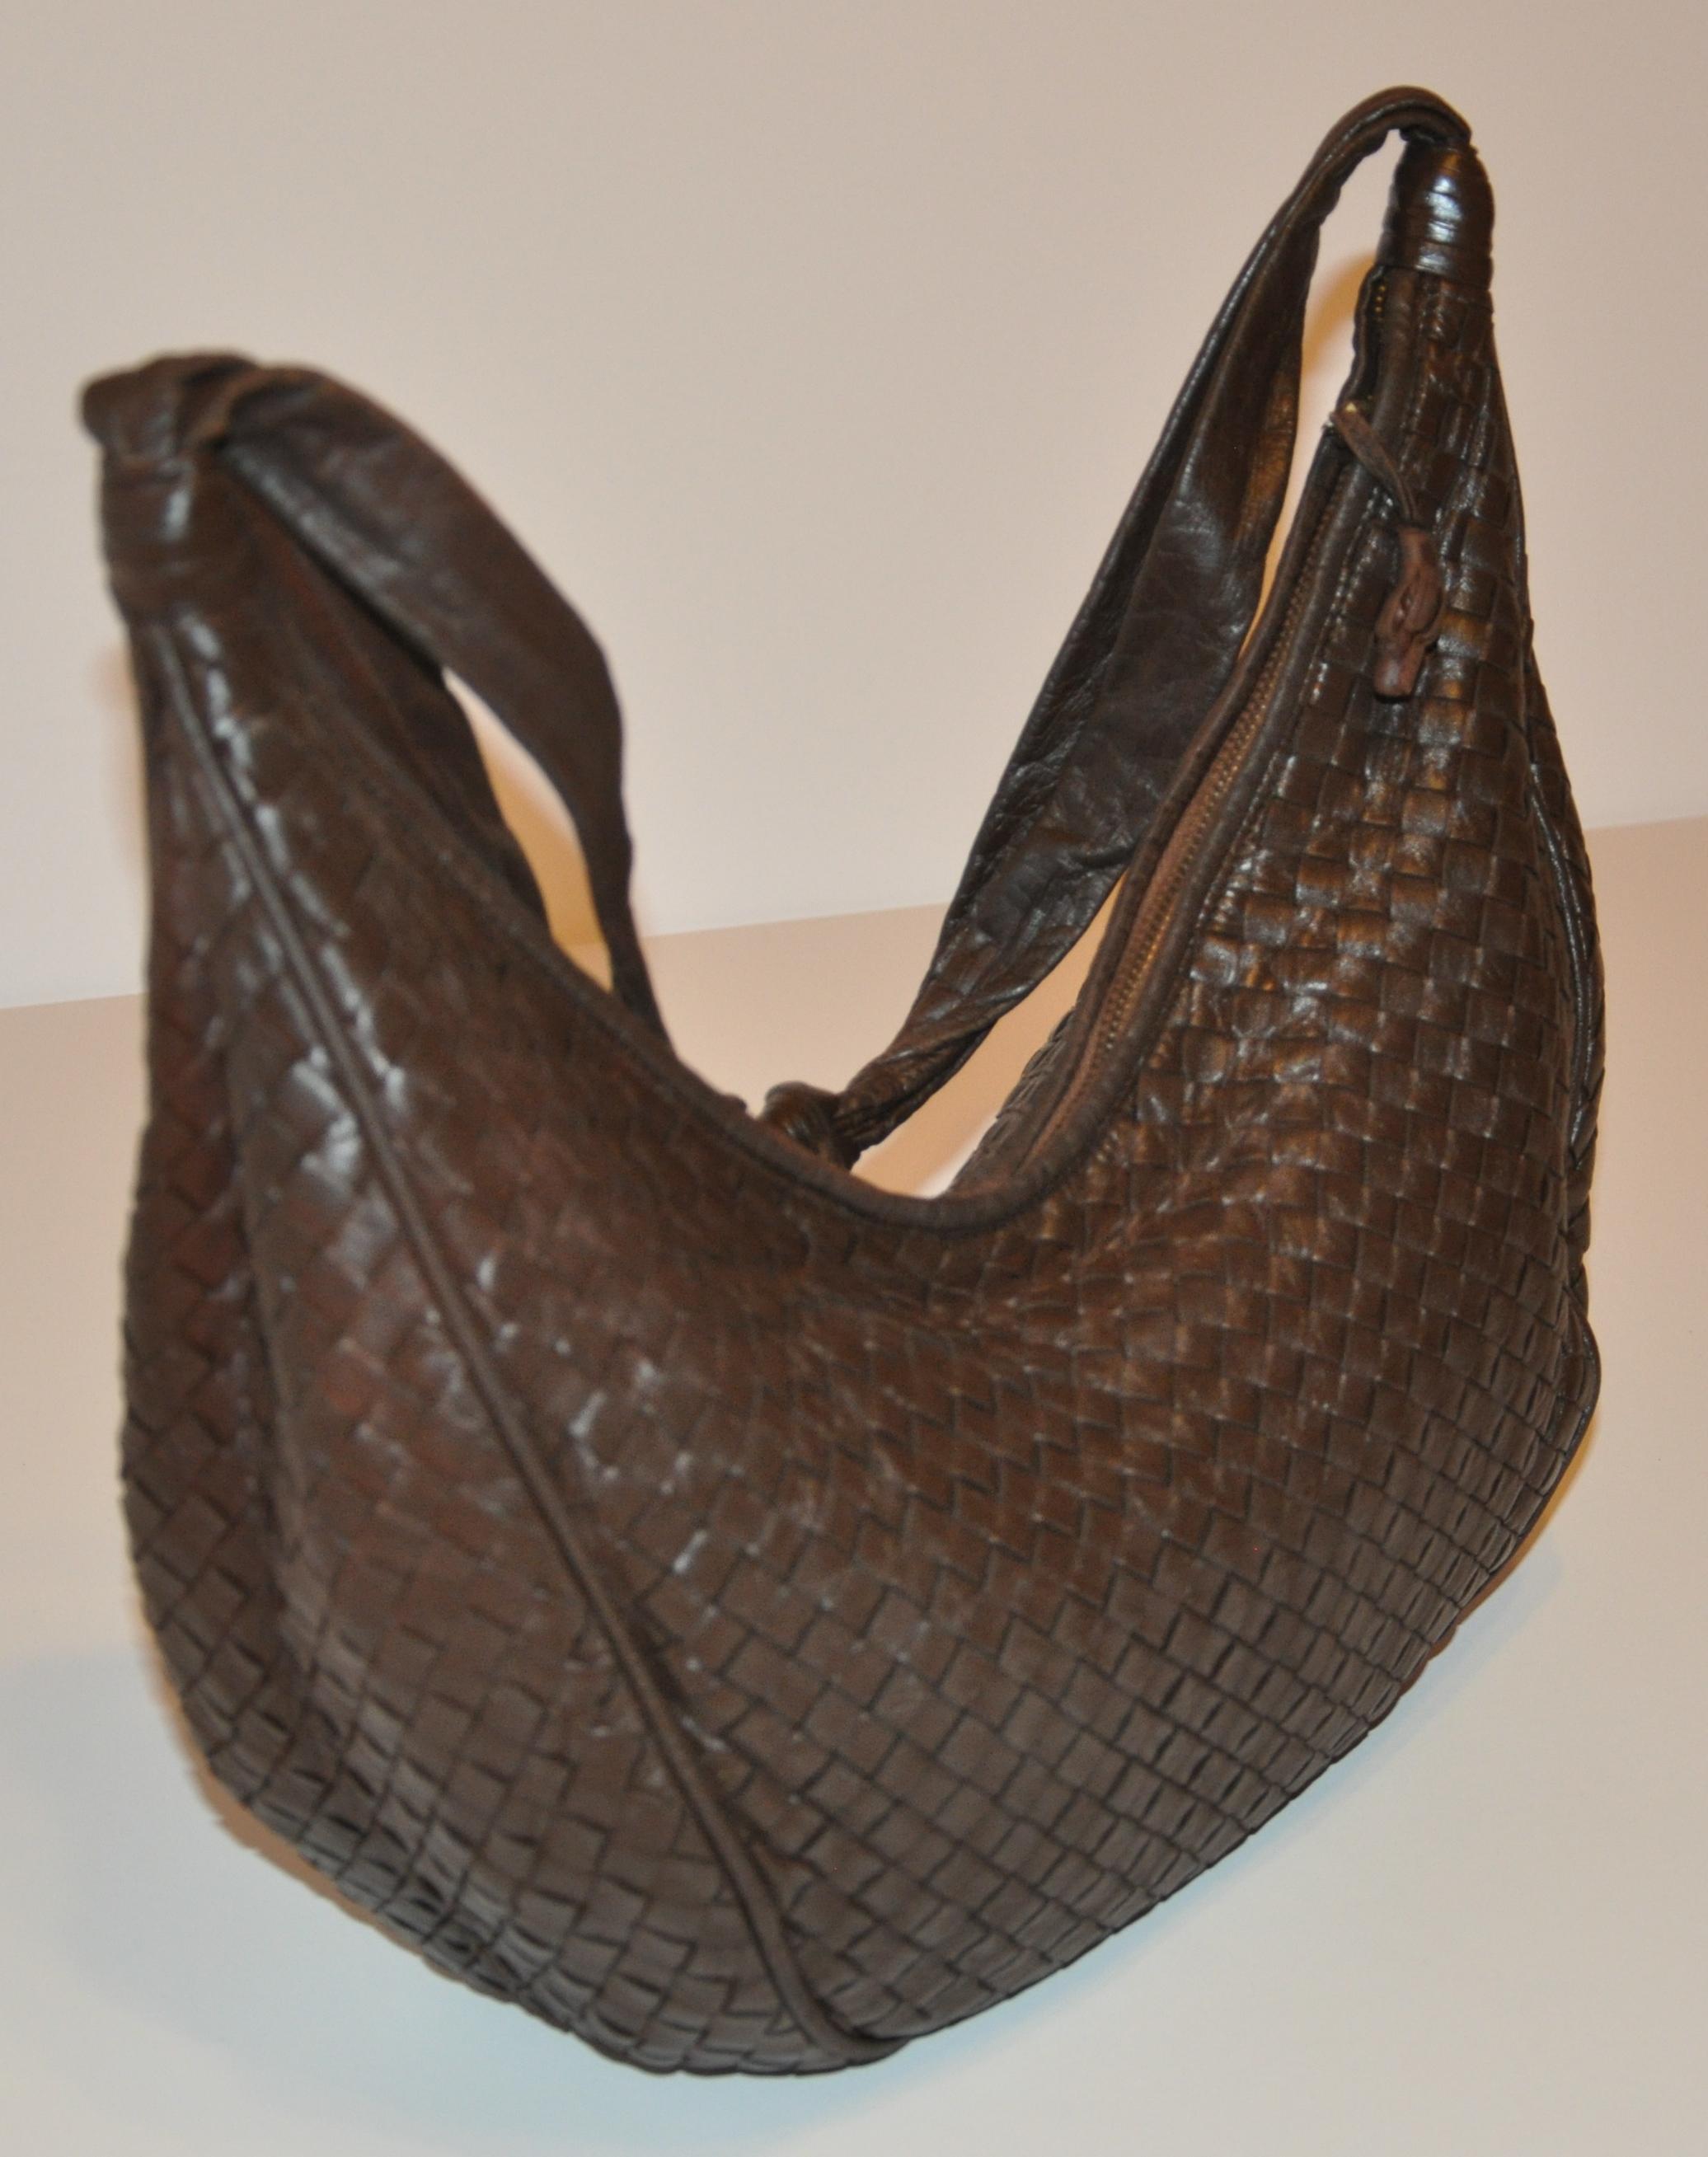        Bottega Veneta deep coco-brown woven lambskin zippered-top shoulder bag is detailed with lambskin piping throughout. The top zipper measures 17 inches. The interior has a large zippered compartment and is fully lined. The shoulder strap